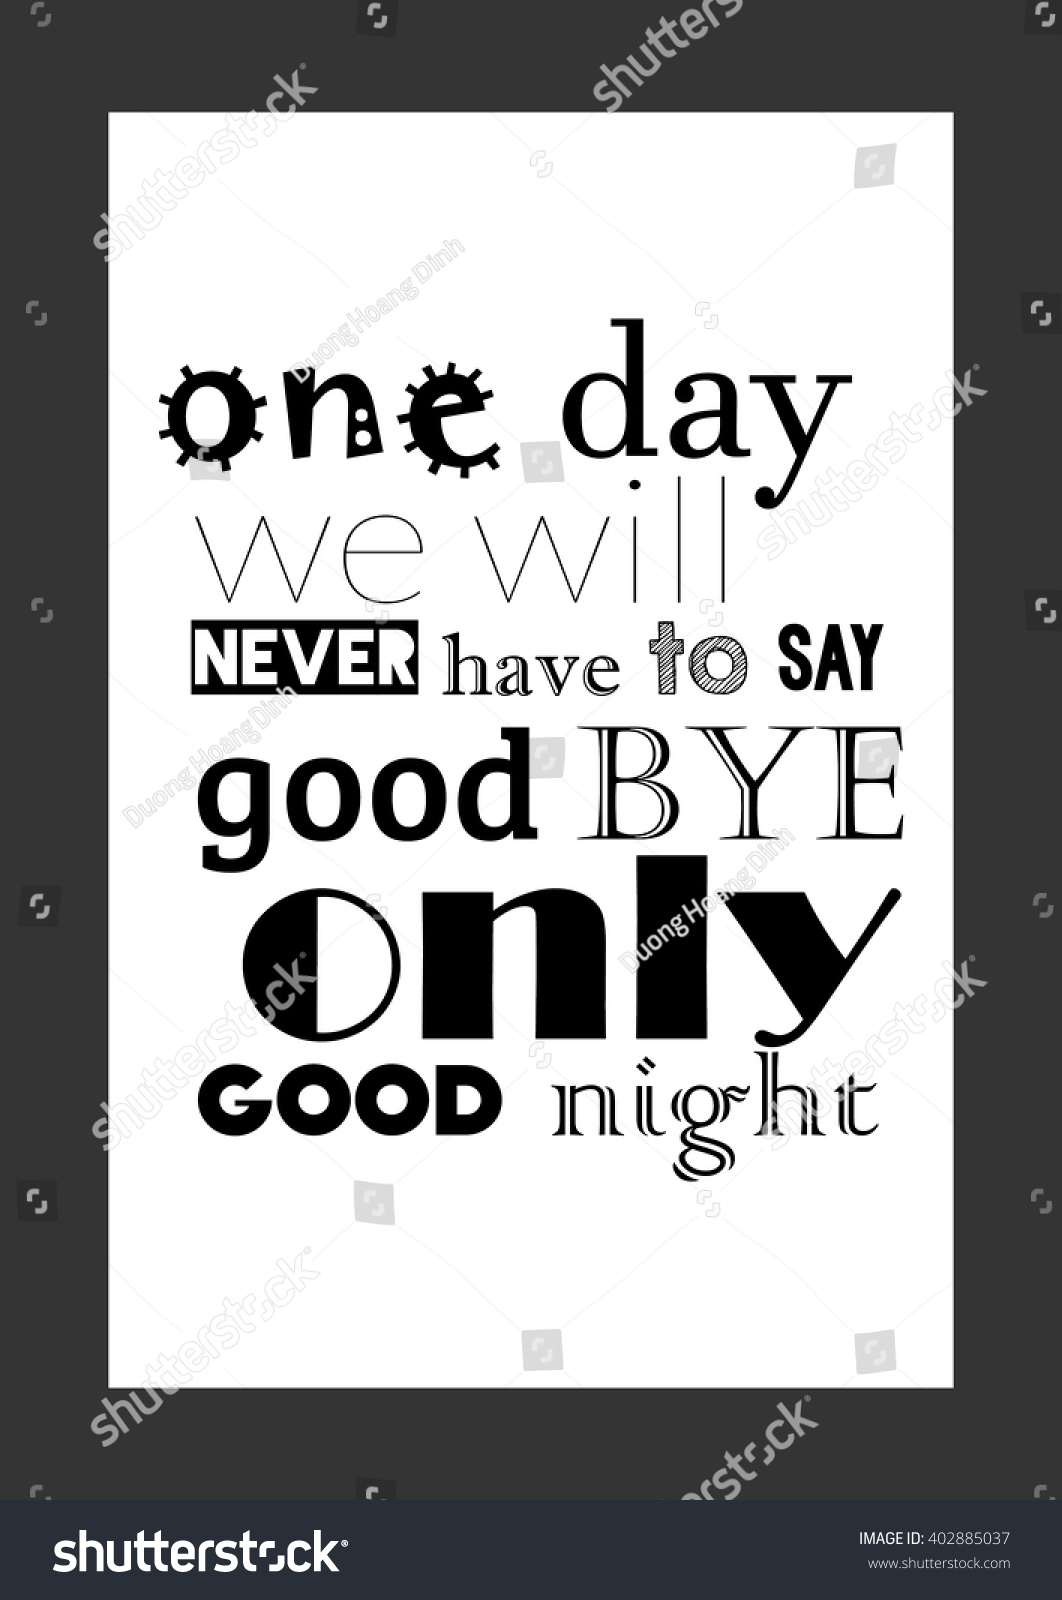 Love quote e day we will never have to say goodbye only goodnight